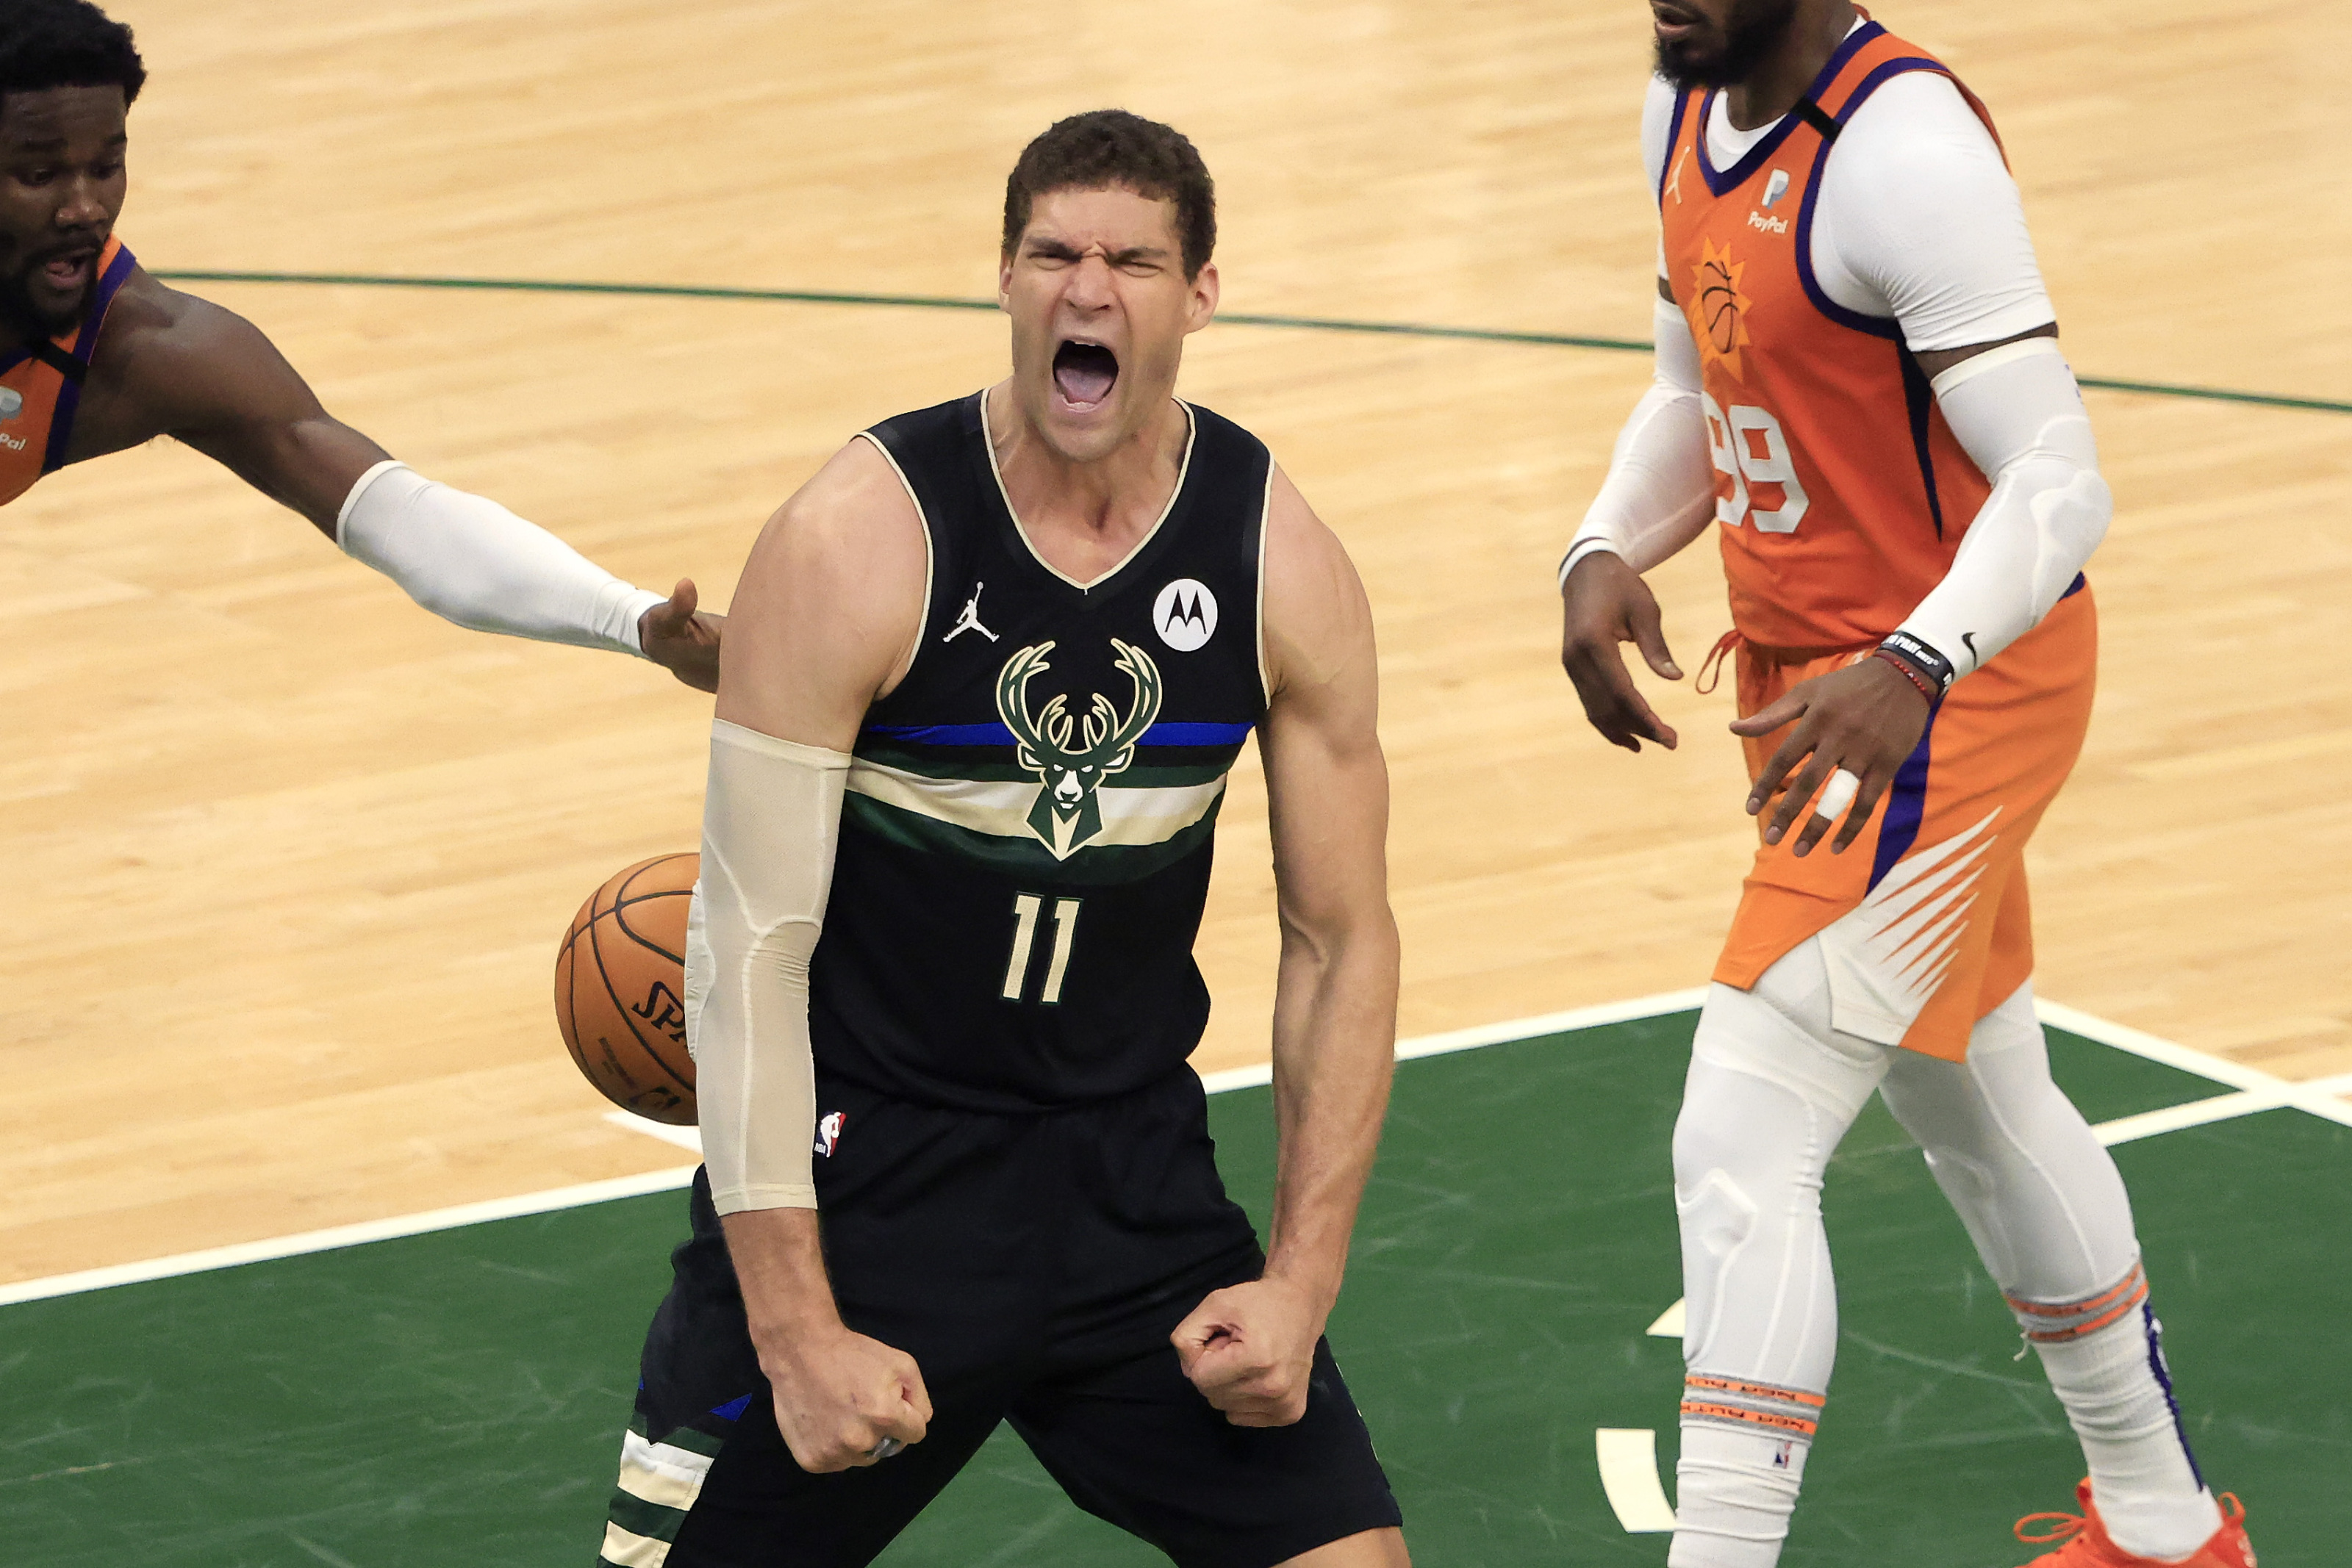 Brook Lopez, the Nets' all-time leading scorer, has been the best